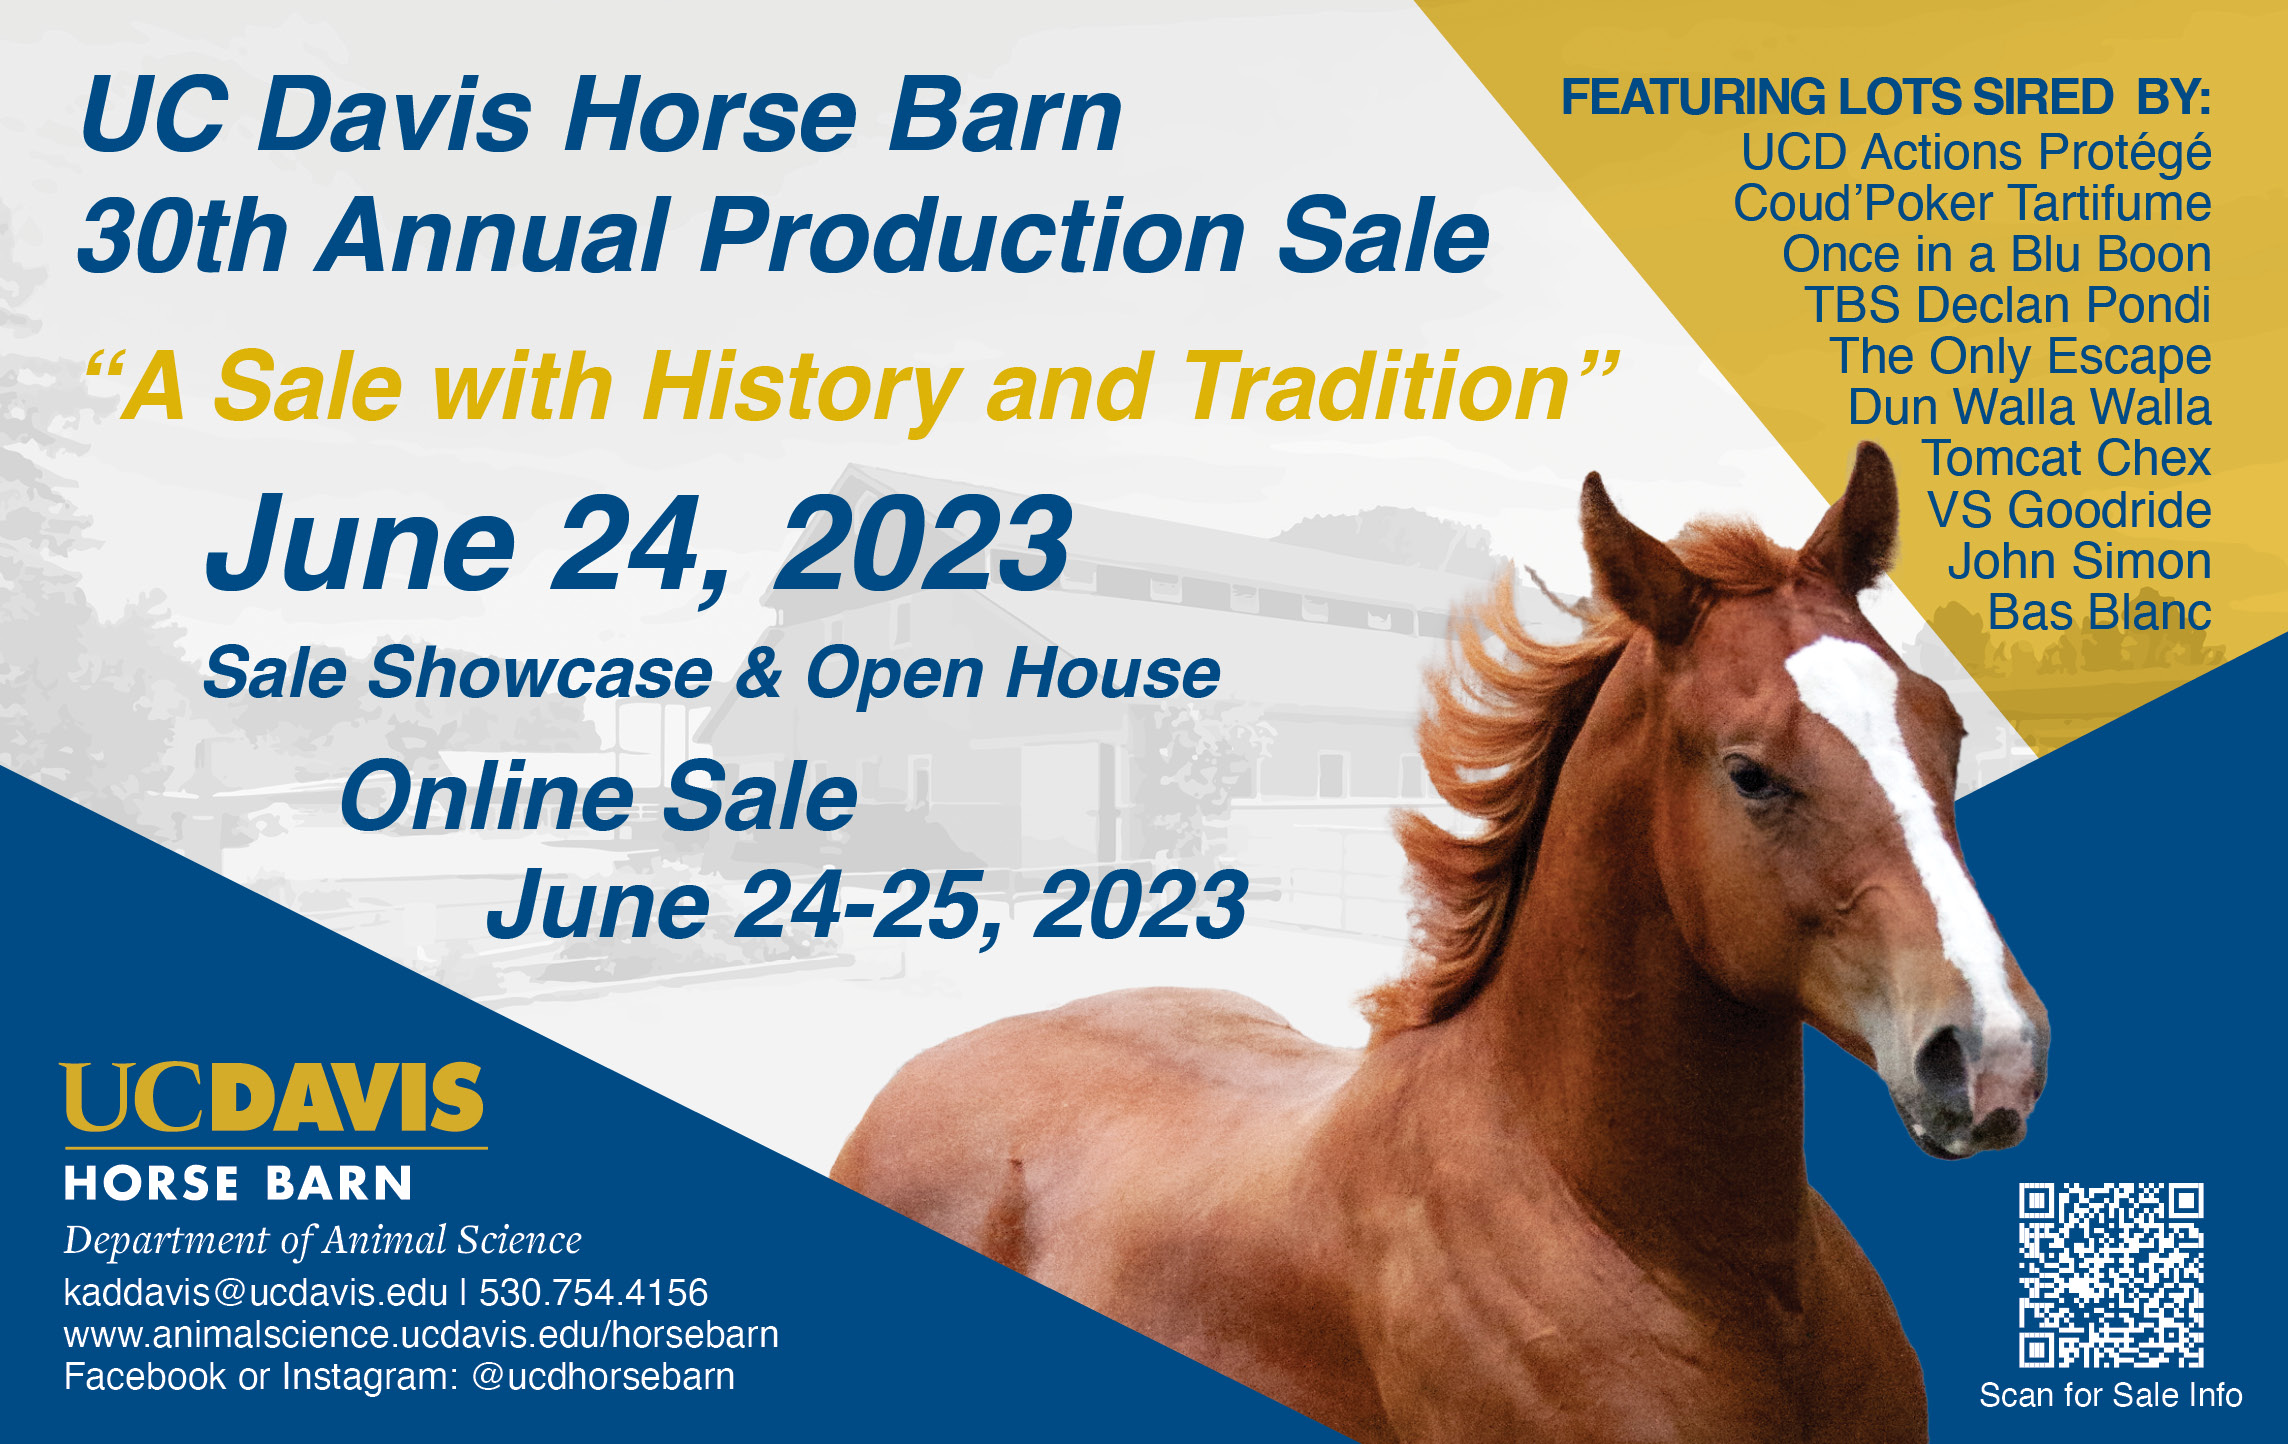 Sales ad. Text reads: UC Davis Horse Barn 30th Annual Production Sale. "A Sale with History and Tradition". June 24, 2023. Sale Showcase & Open House, Online Sale June 24-25, 2023. Featuring lots sired by: UCD Actions Protege, Coud'Poker Tartifume, Once in a Blu Boon, TBS Declan Pondi, The Only Escape, Dun Walla Walla, Tomcat Chex, VS Goodride, John Simon, and Bas Blanc. UC Davis Hose Barn, Department of Animal Science. Contact: kaddavis@ucdavis.edu, 530-754-4156, www.animalscience.ucdavis.edu/horsebarn